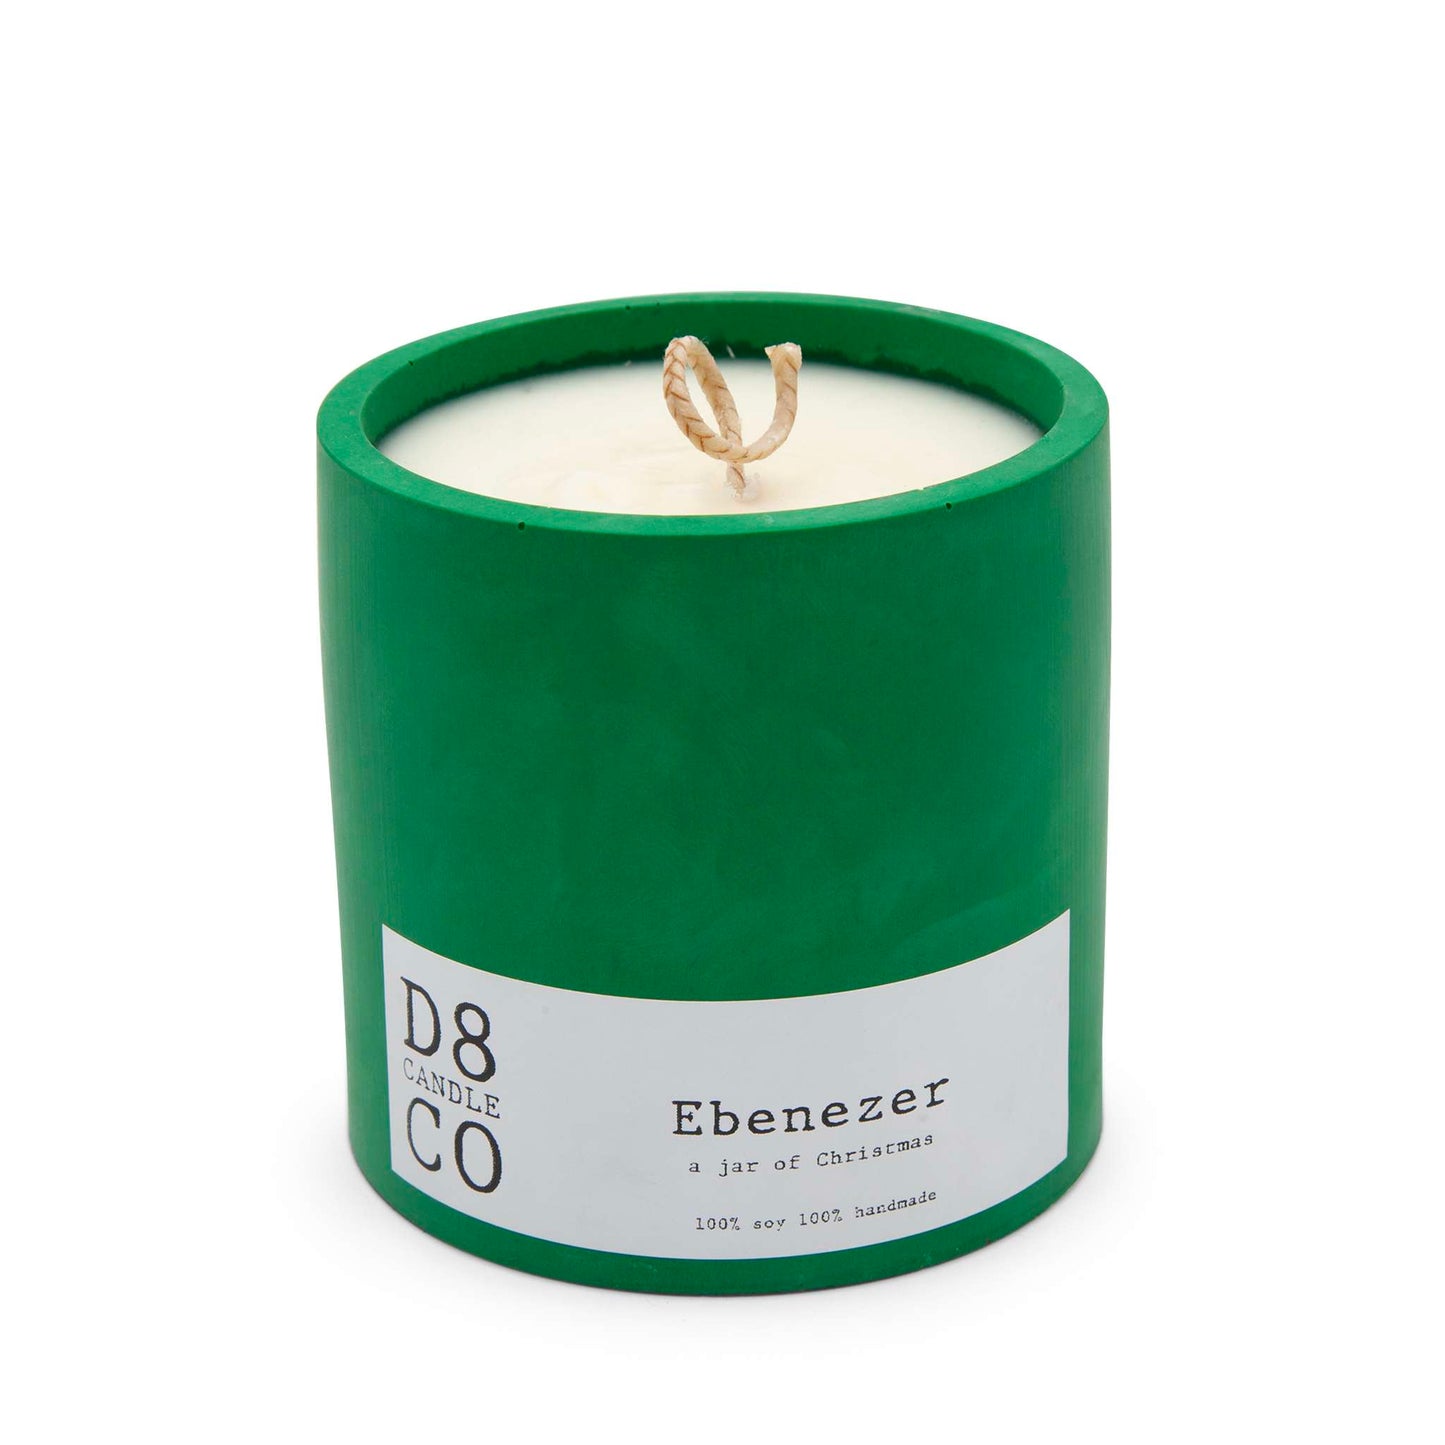 D8 Candle Co. Candles Ebenezer Christmas Candle - D8 Candle Co.